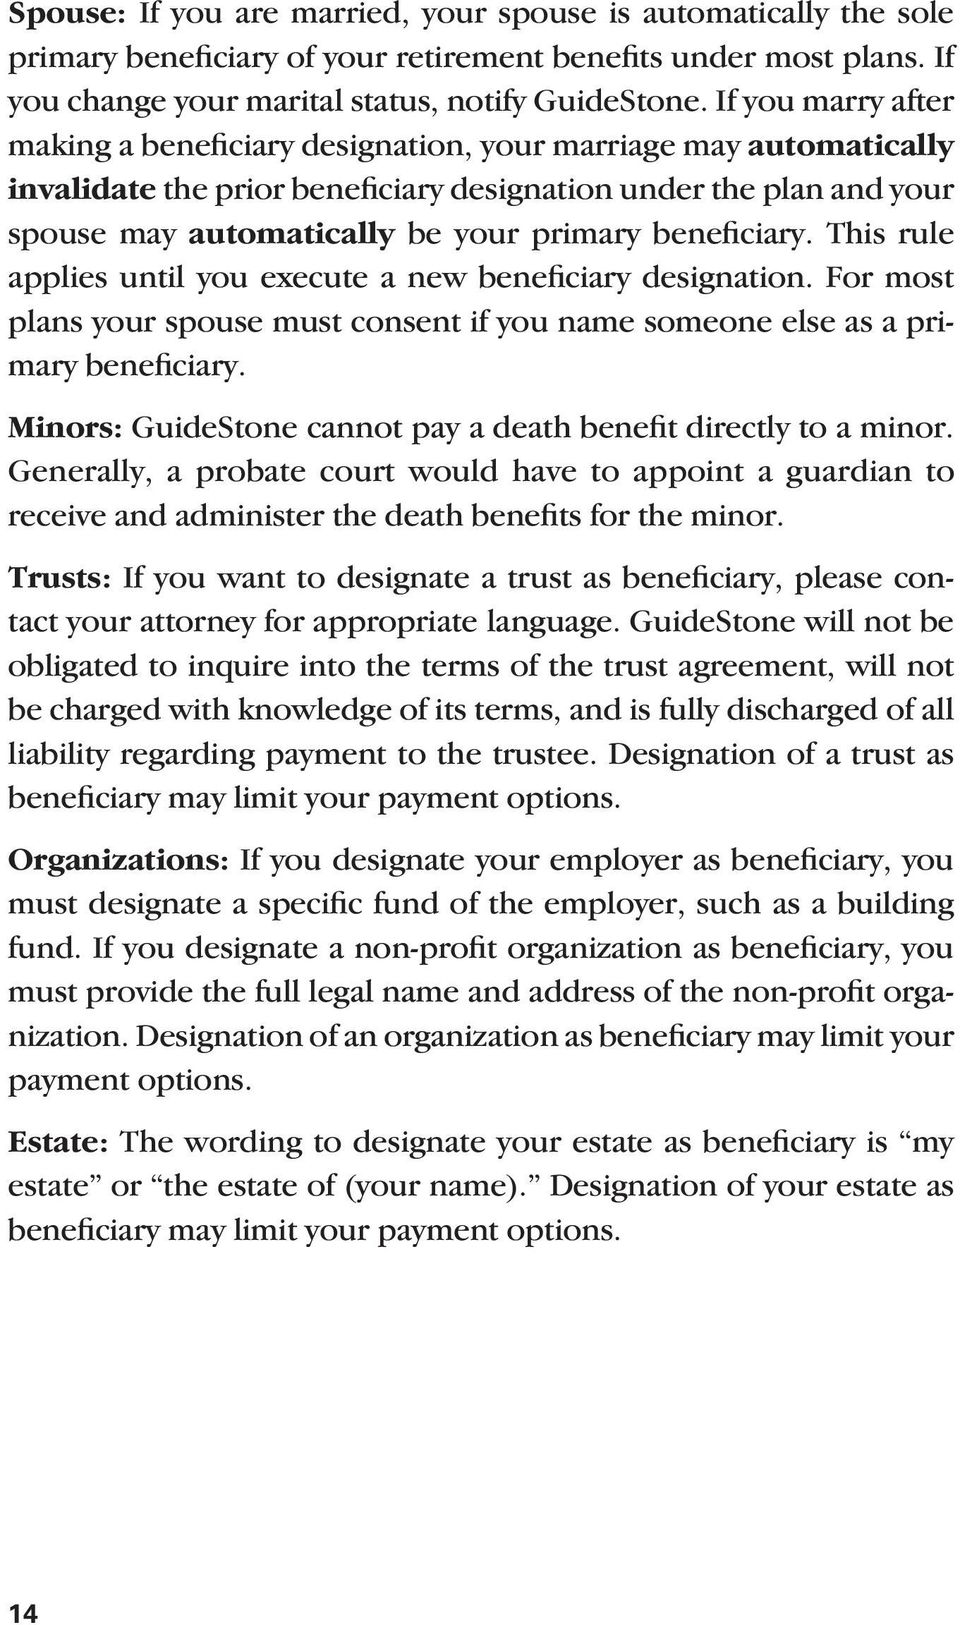 beneficiary. This rule applies until you execute a new beneficiary designation. For most plans your spouse must consent if you name someone else as a primary beneficiary.